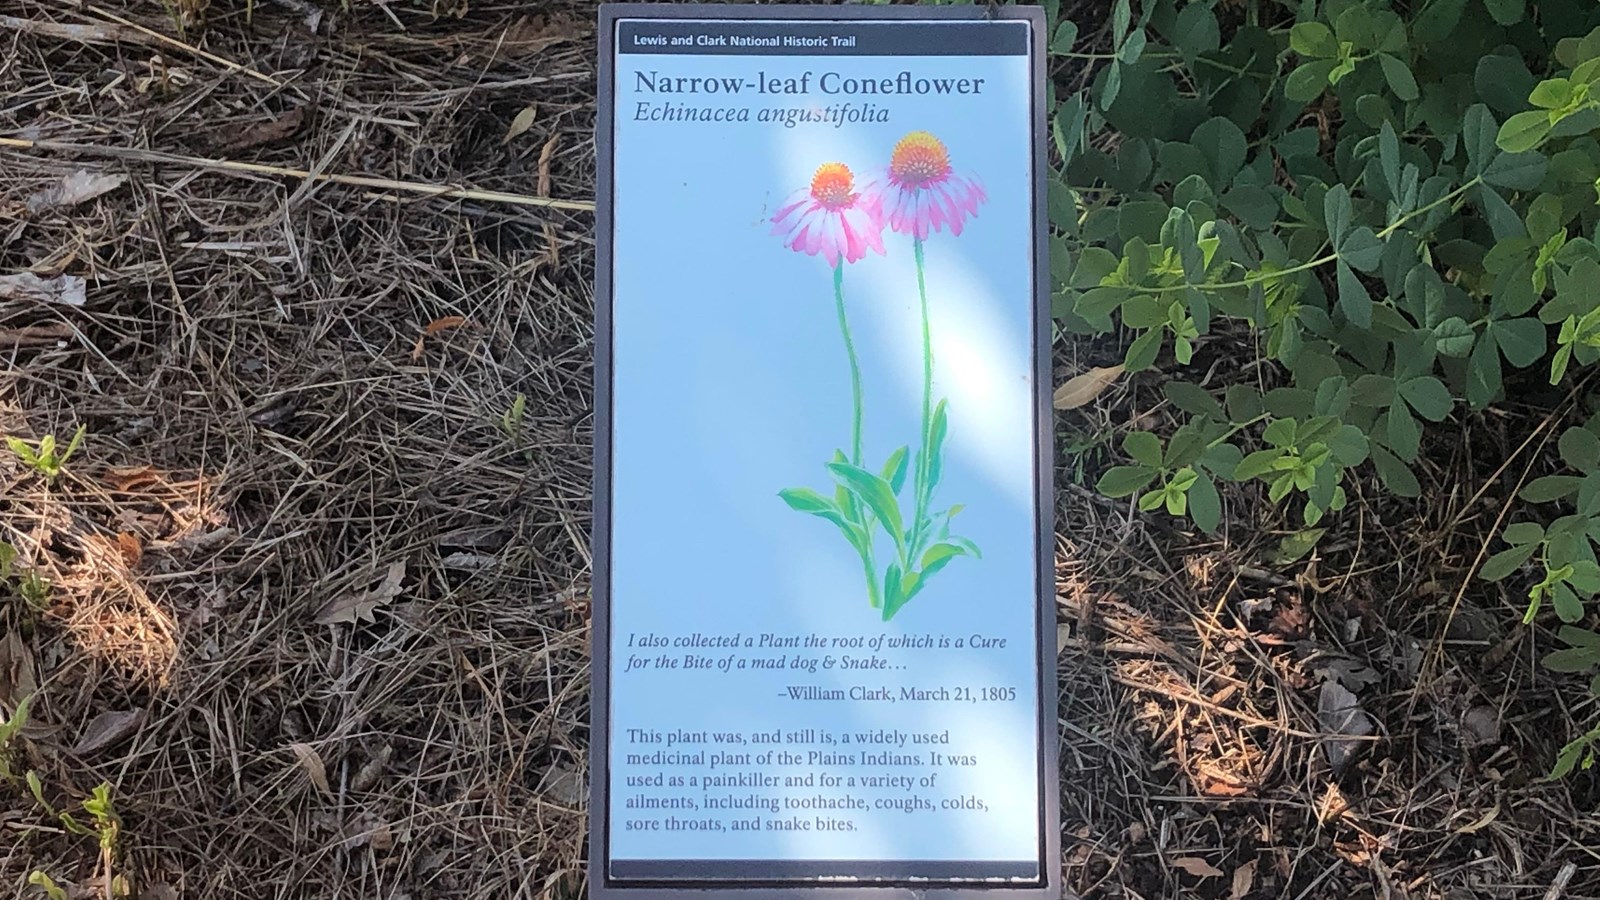 A small sign is placed near a green plant. The sign describes the narrow-leaf coneflower.